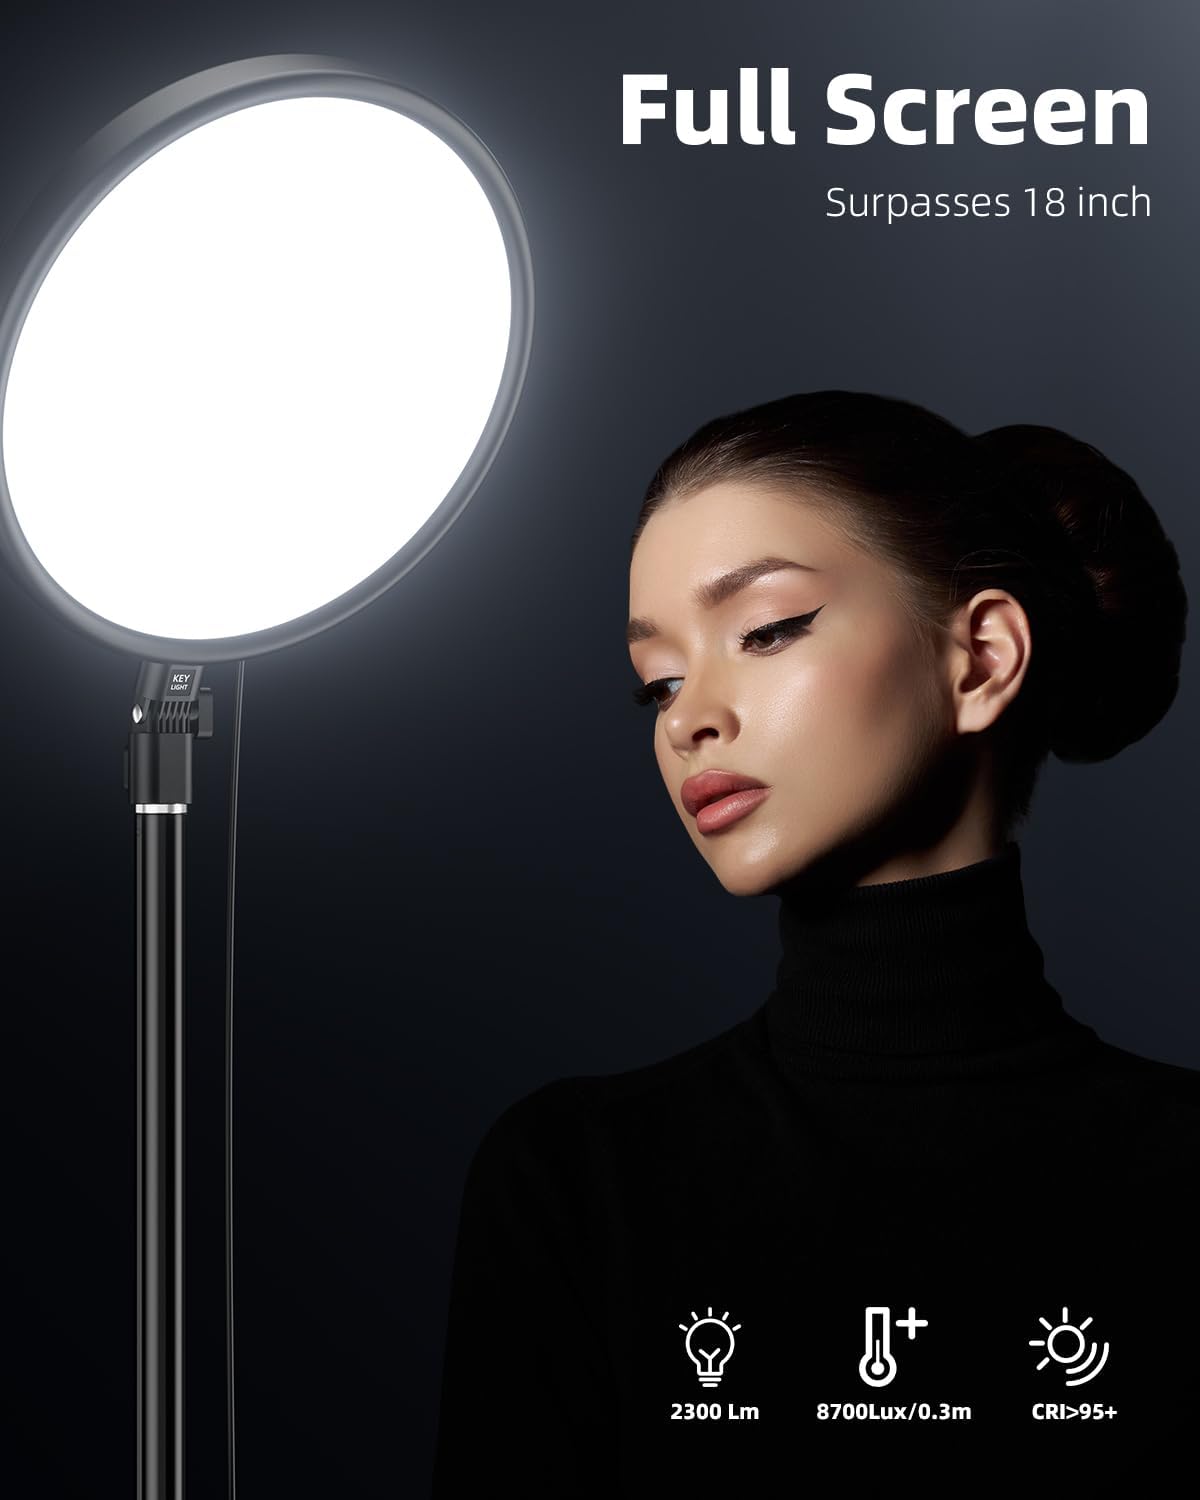 Large Ring Light Kit, Weilisi 6500K Professional Full-Screen Big Ring Light with Stand and Phone Holder, 64 Tall Ring Light with Remote for Studio Video Photography, TikTok, YouTube, Live Stream